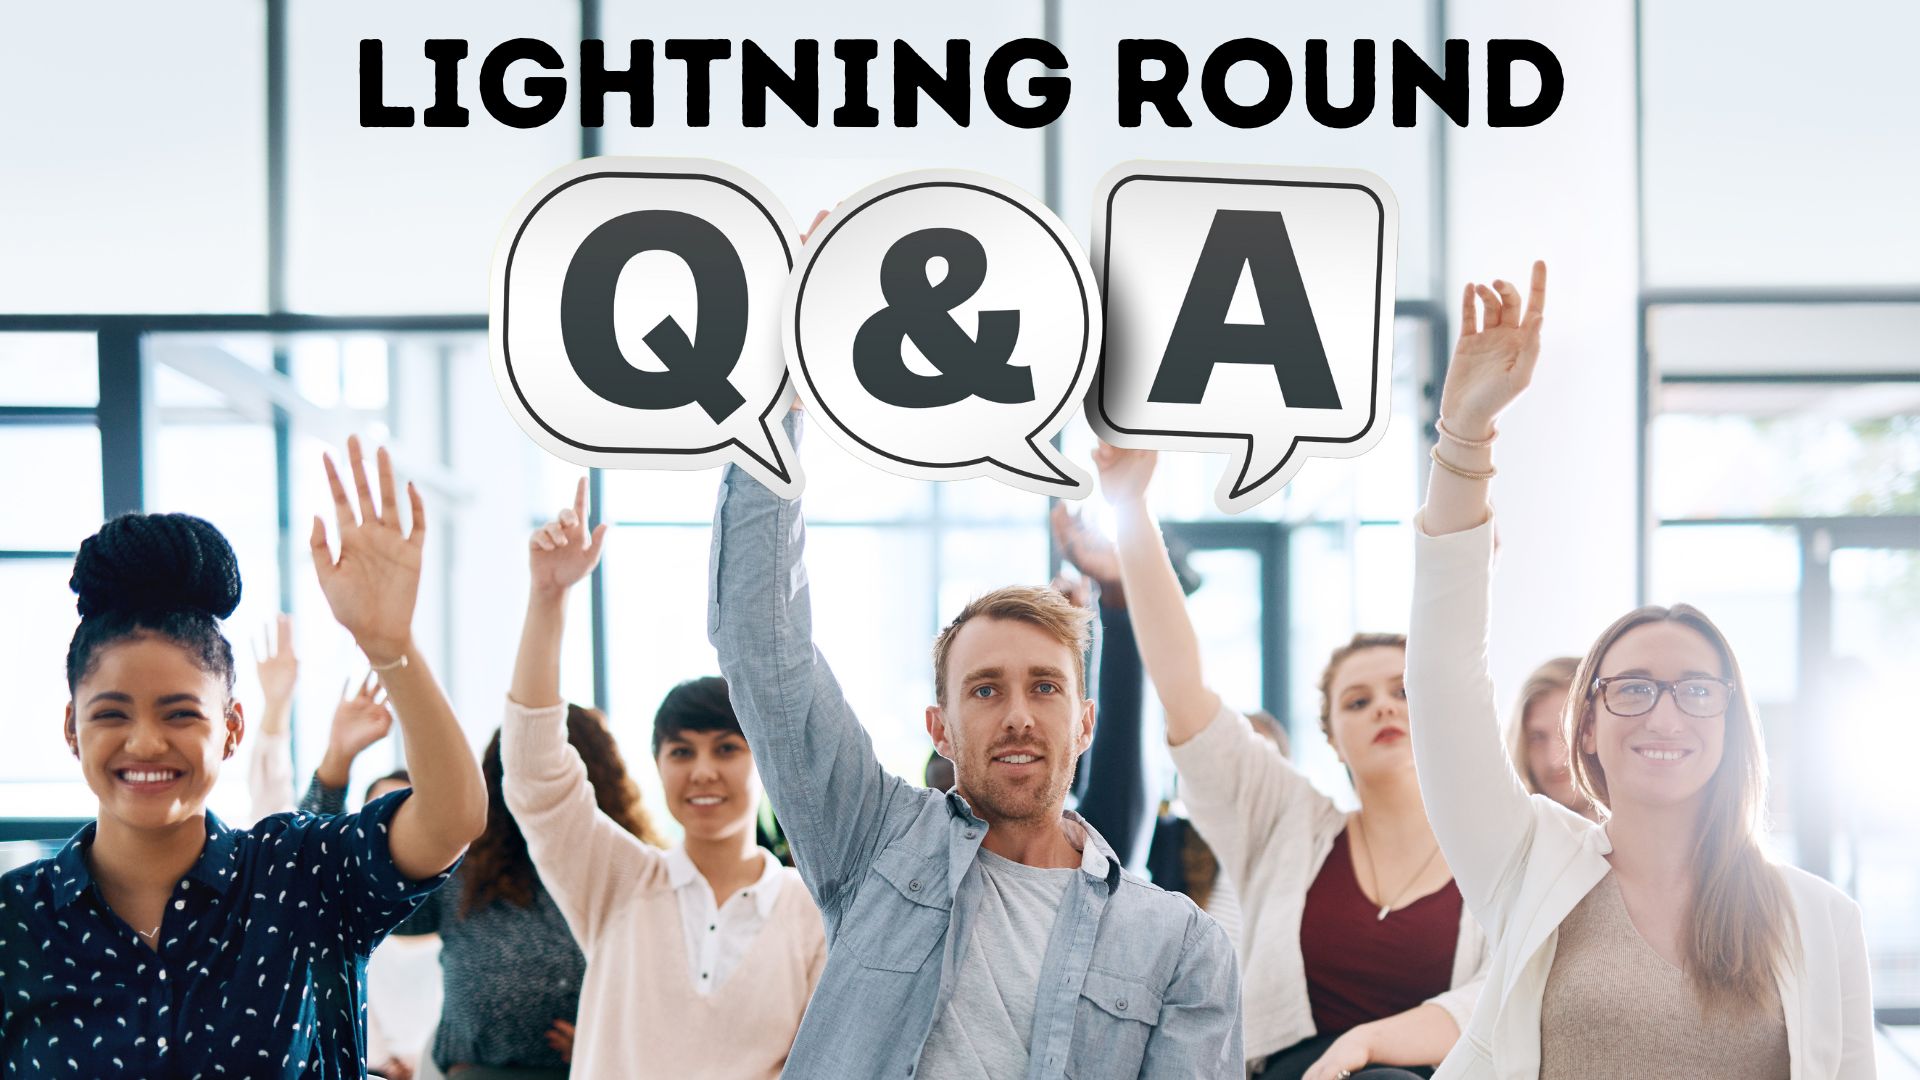 Q&A Lightning Round #2: 7 More Questions From Listeners Answered